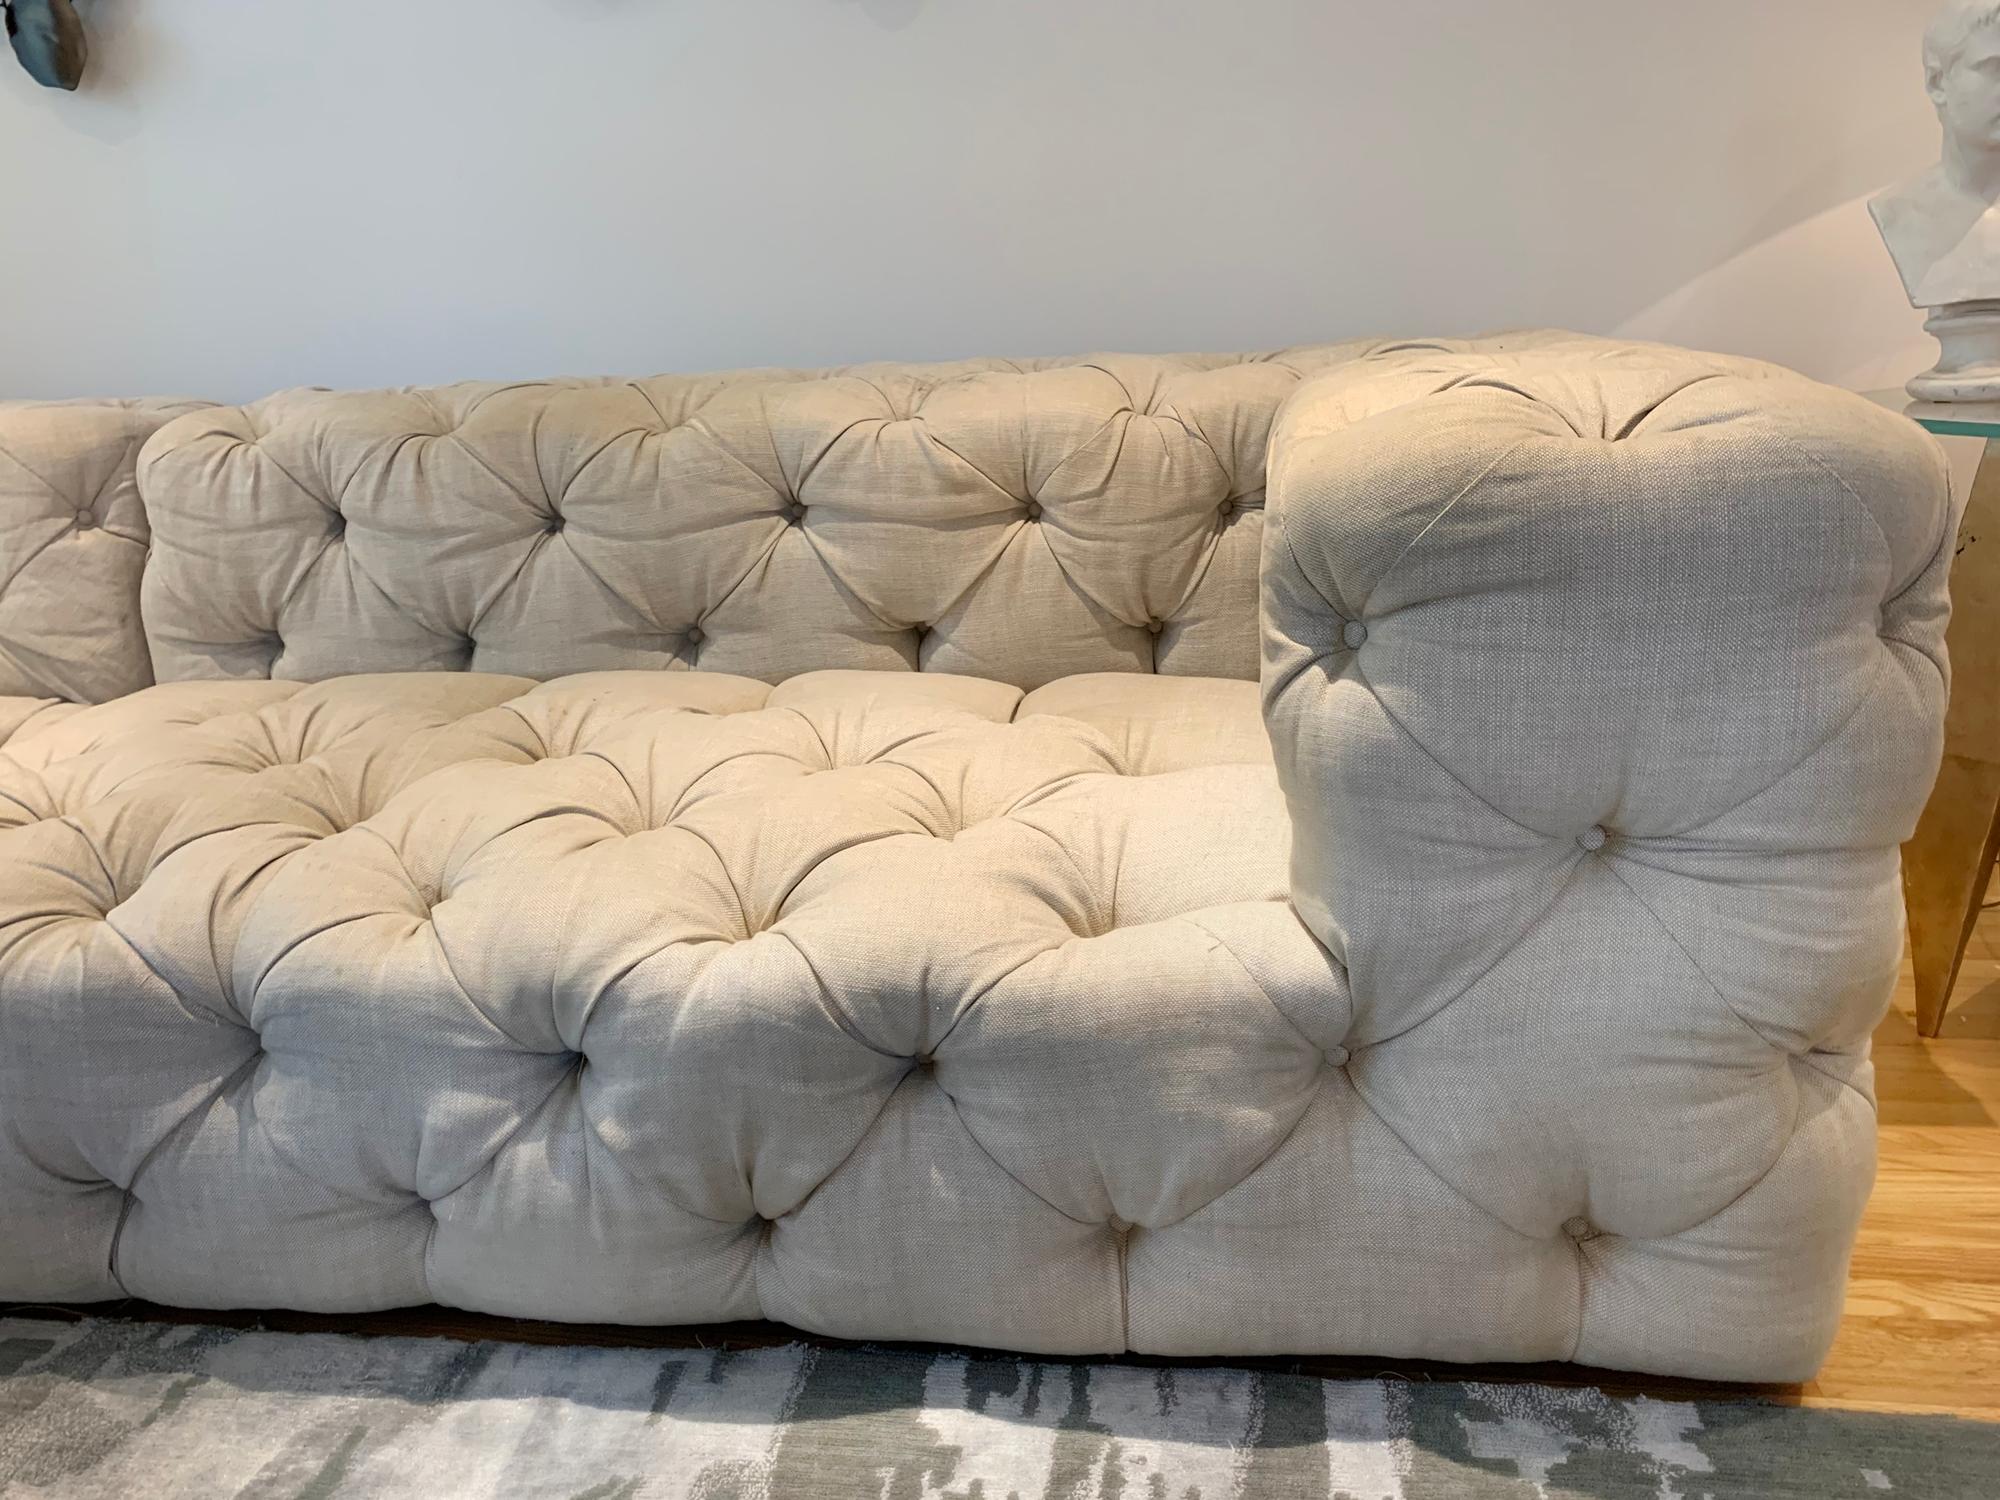 Contemporary Deep Tufted 2 Piece Sectional Sofa Upholstered in Cream Colored Linen Fabric